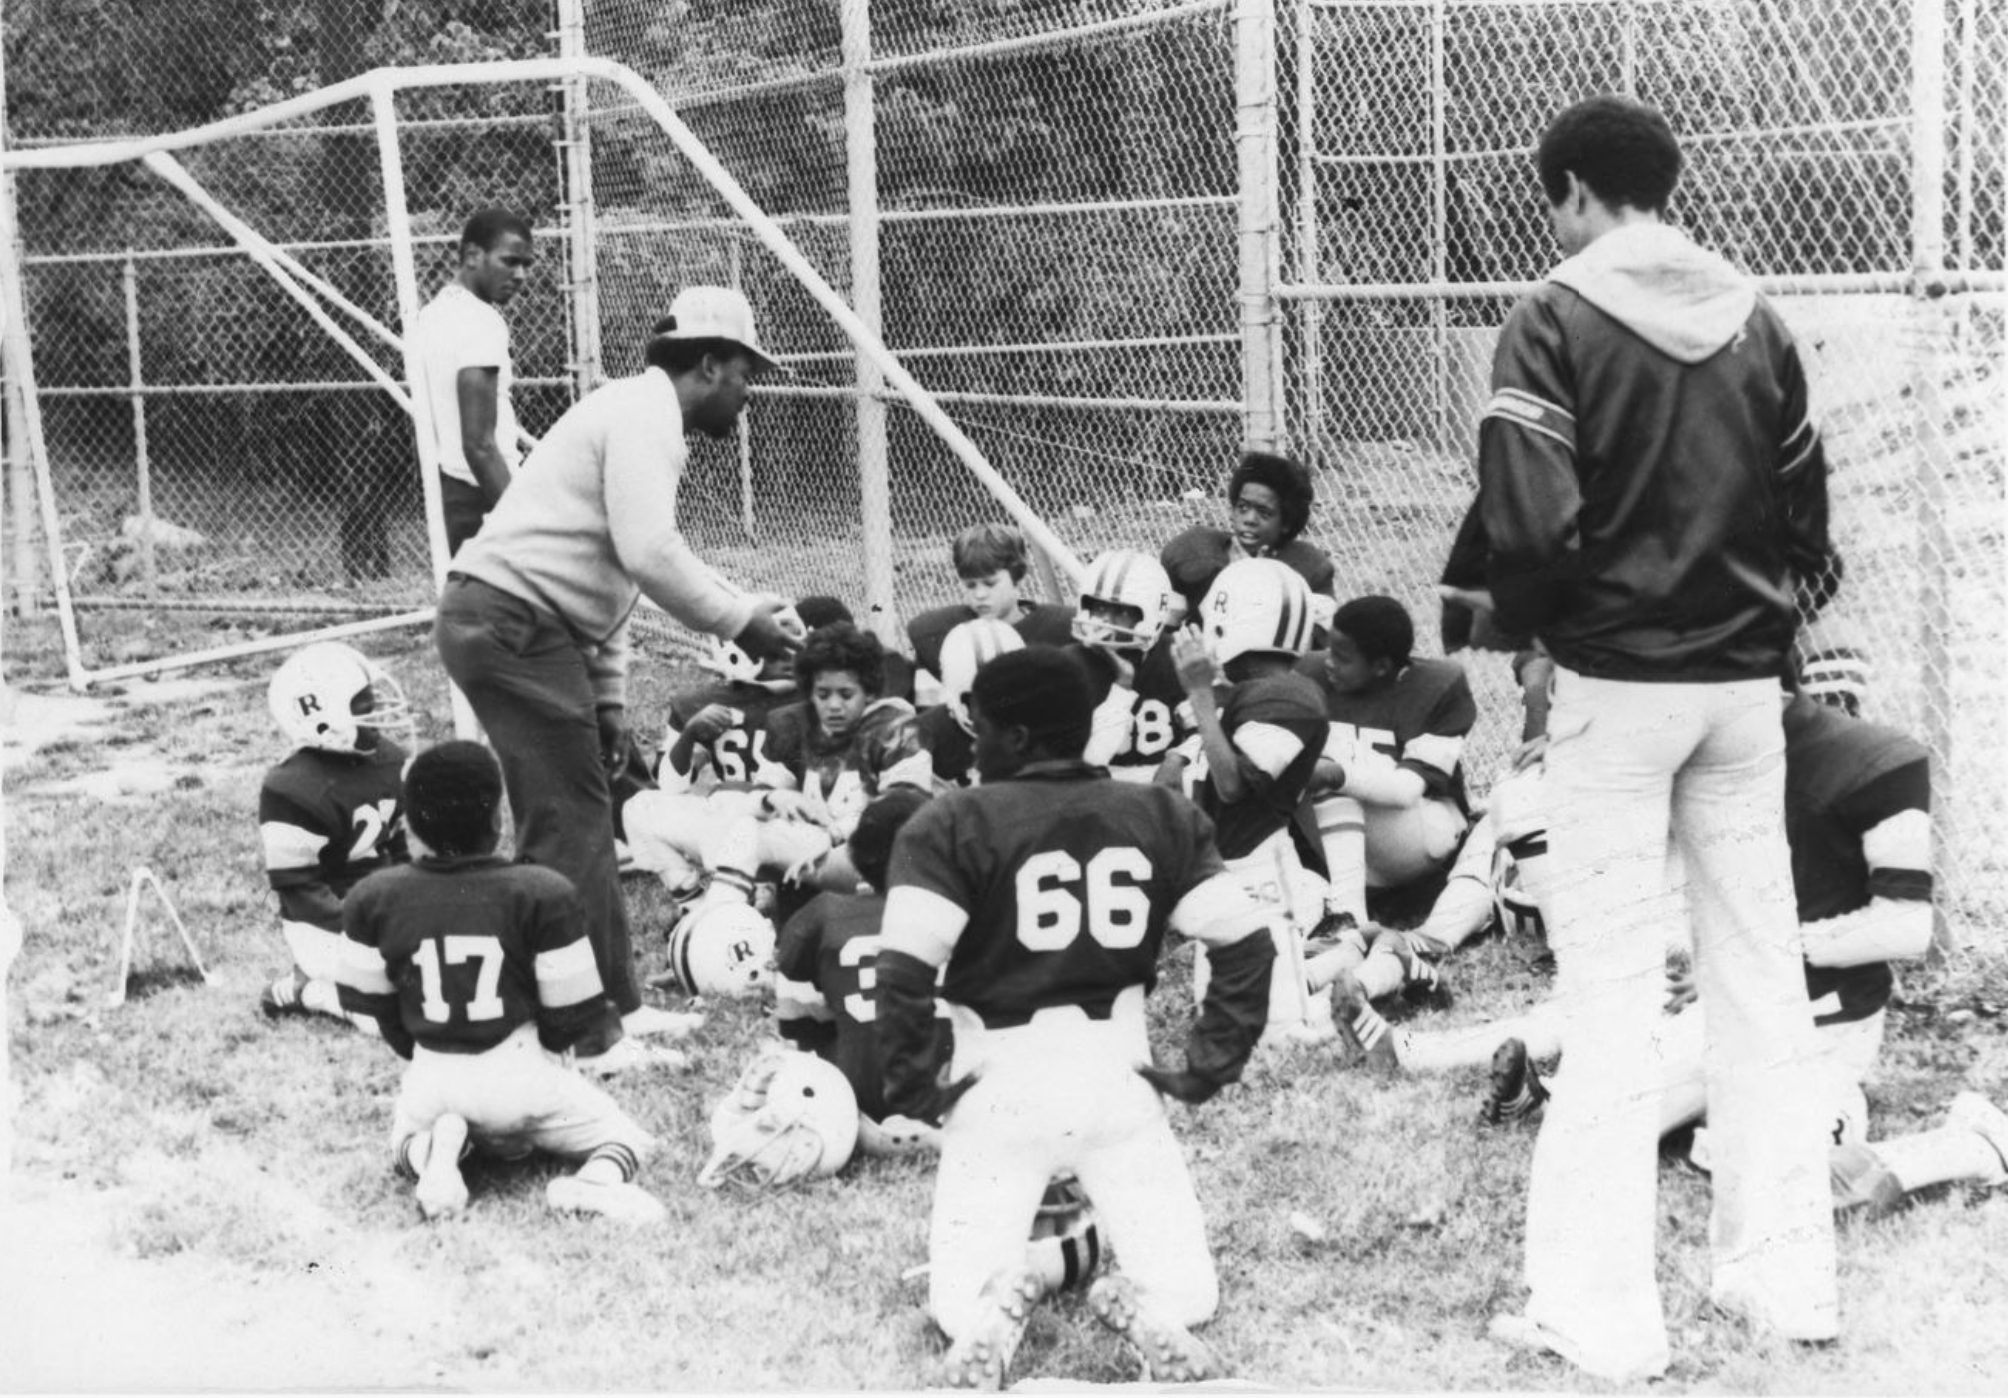 A group of children in football uniforms gather to listen to their coach.